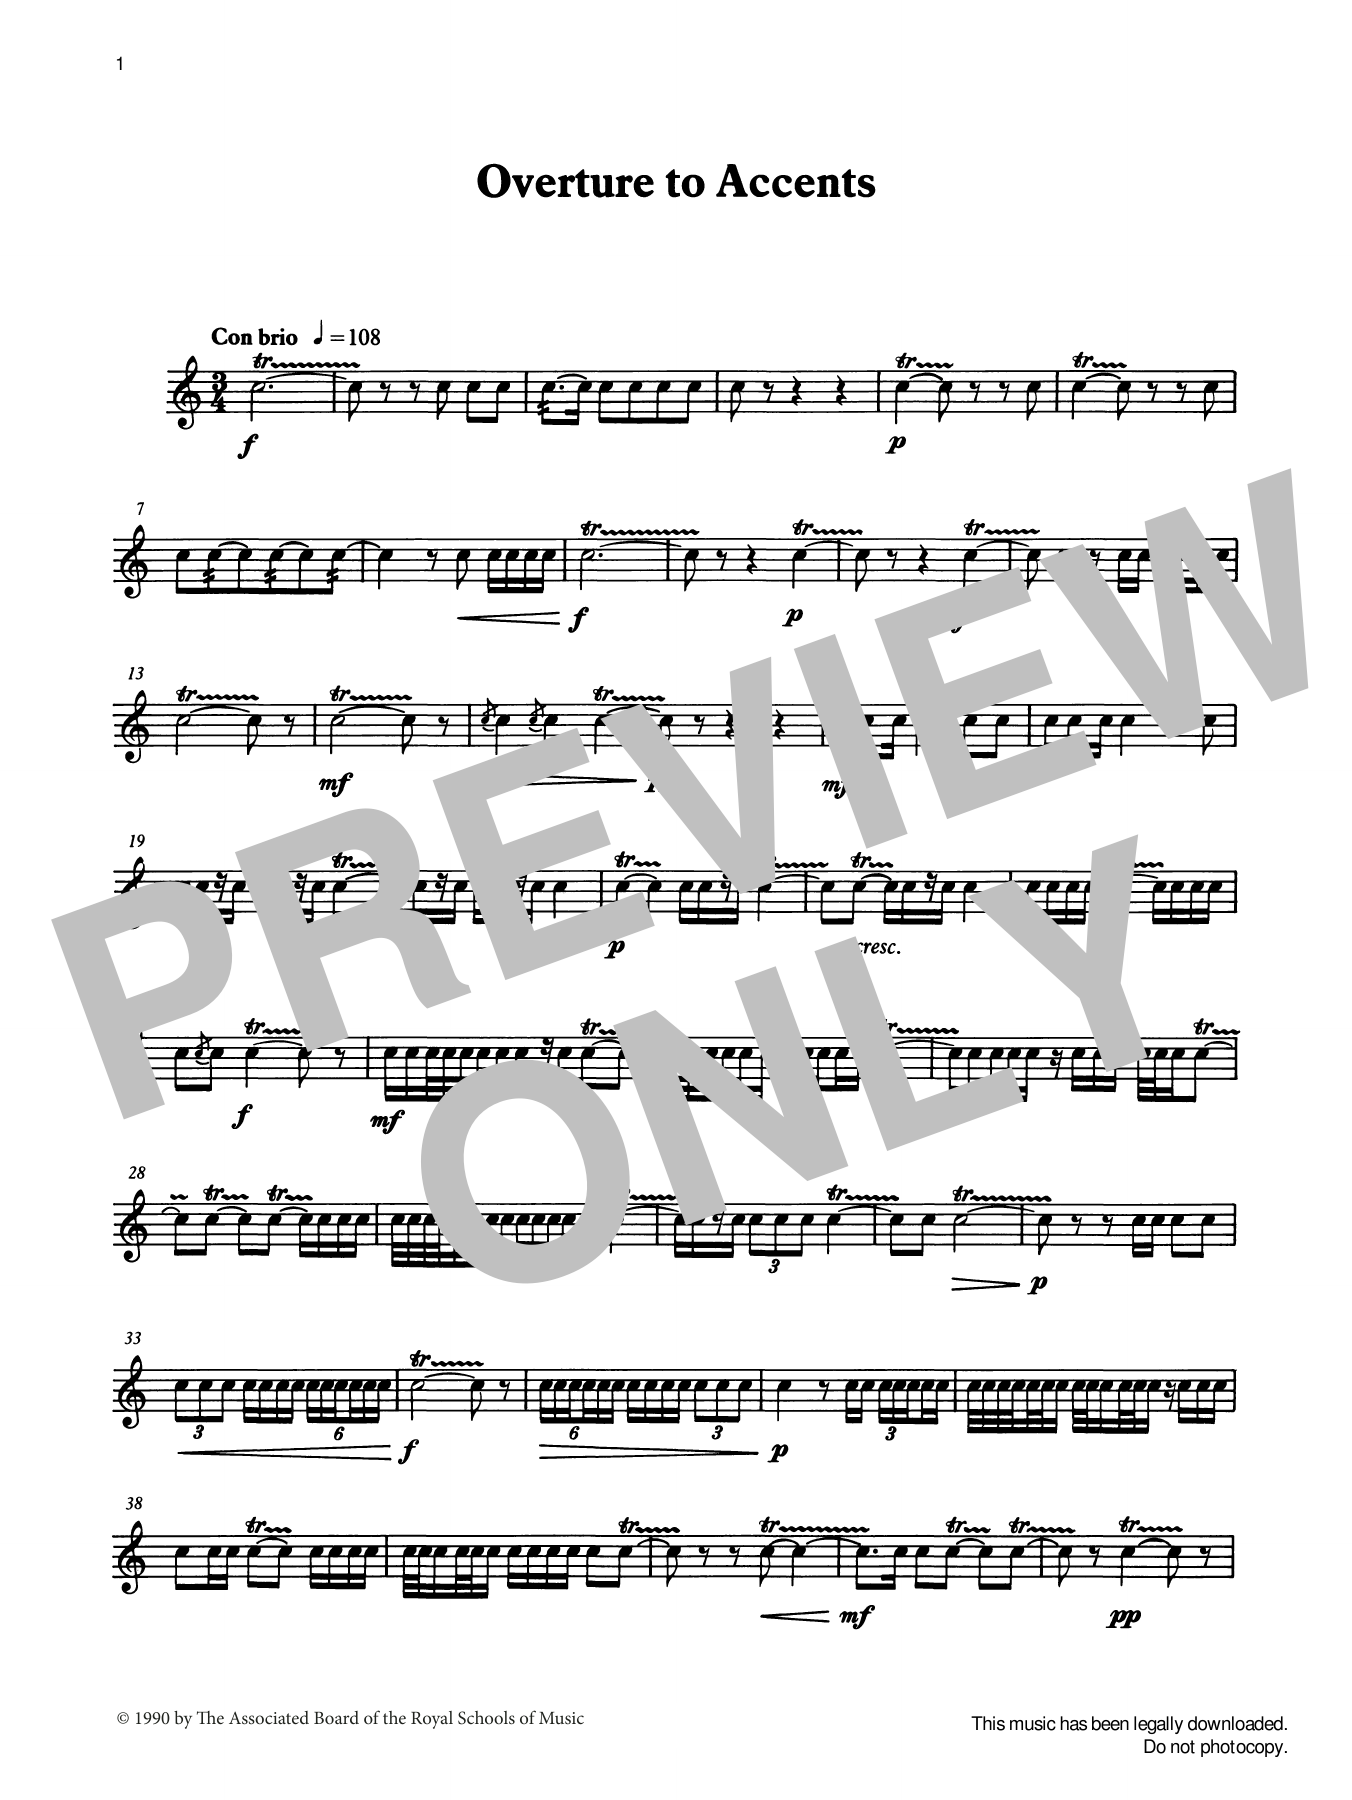 Download Ian Wright and Kevin Hathaway Overture to Accents from Graded Music f Sheet Music